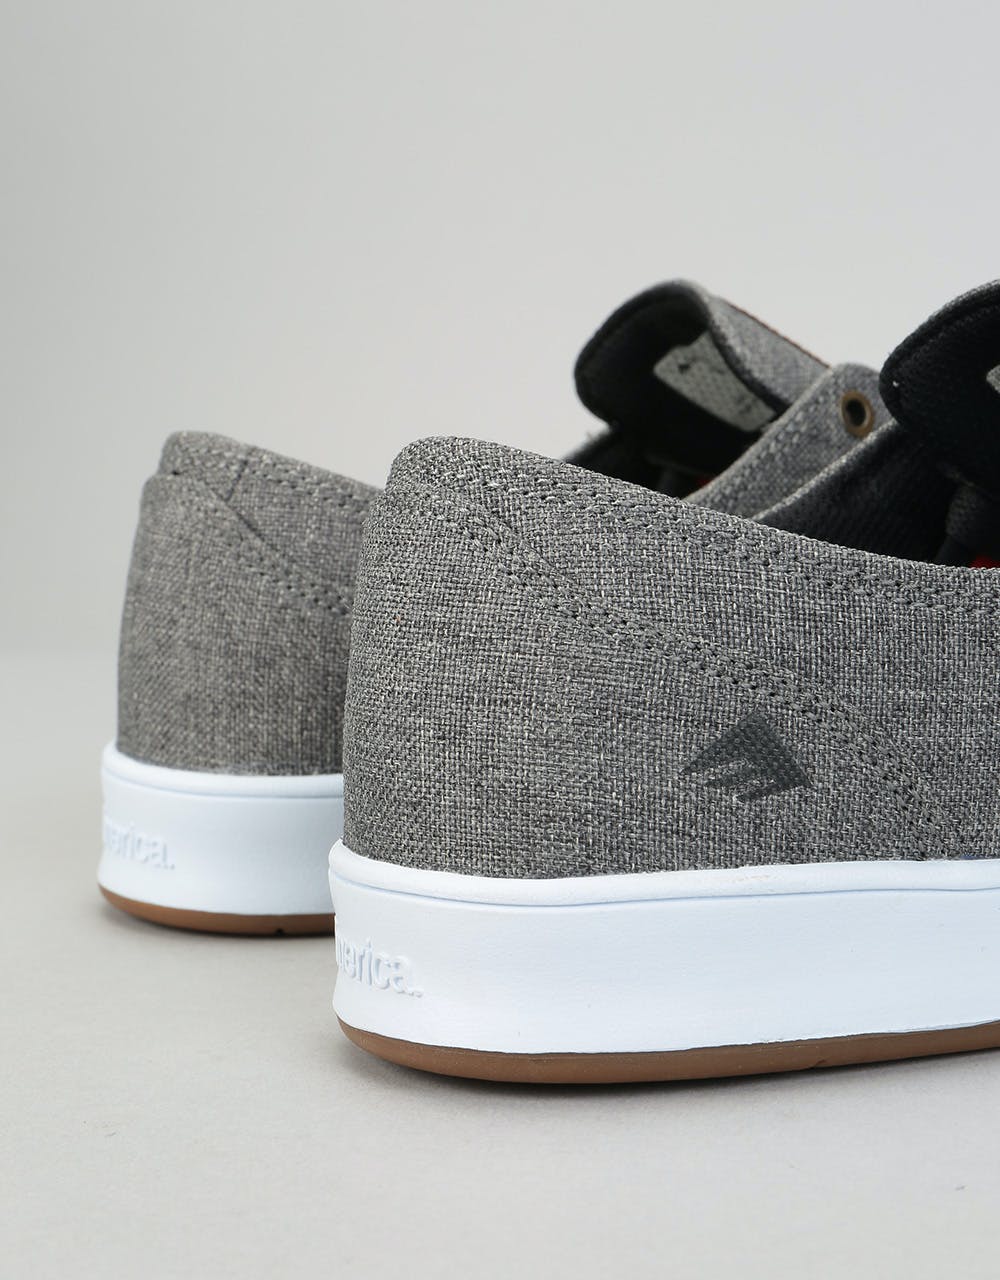 Emerica The Romero Laced SMU Skate Shoes - Grey/Brown